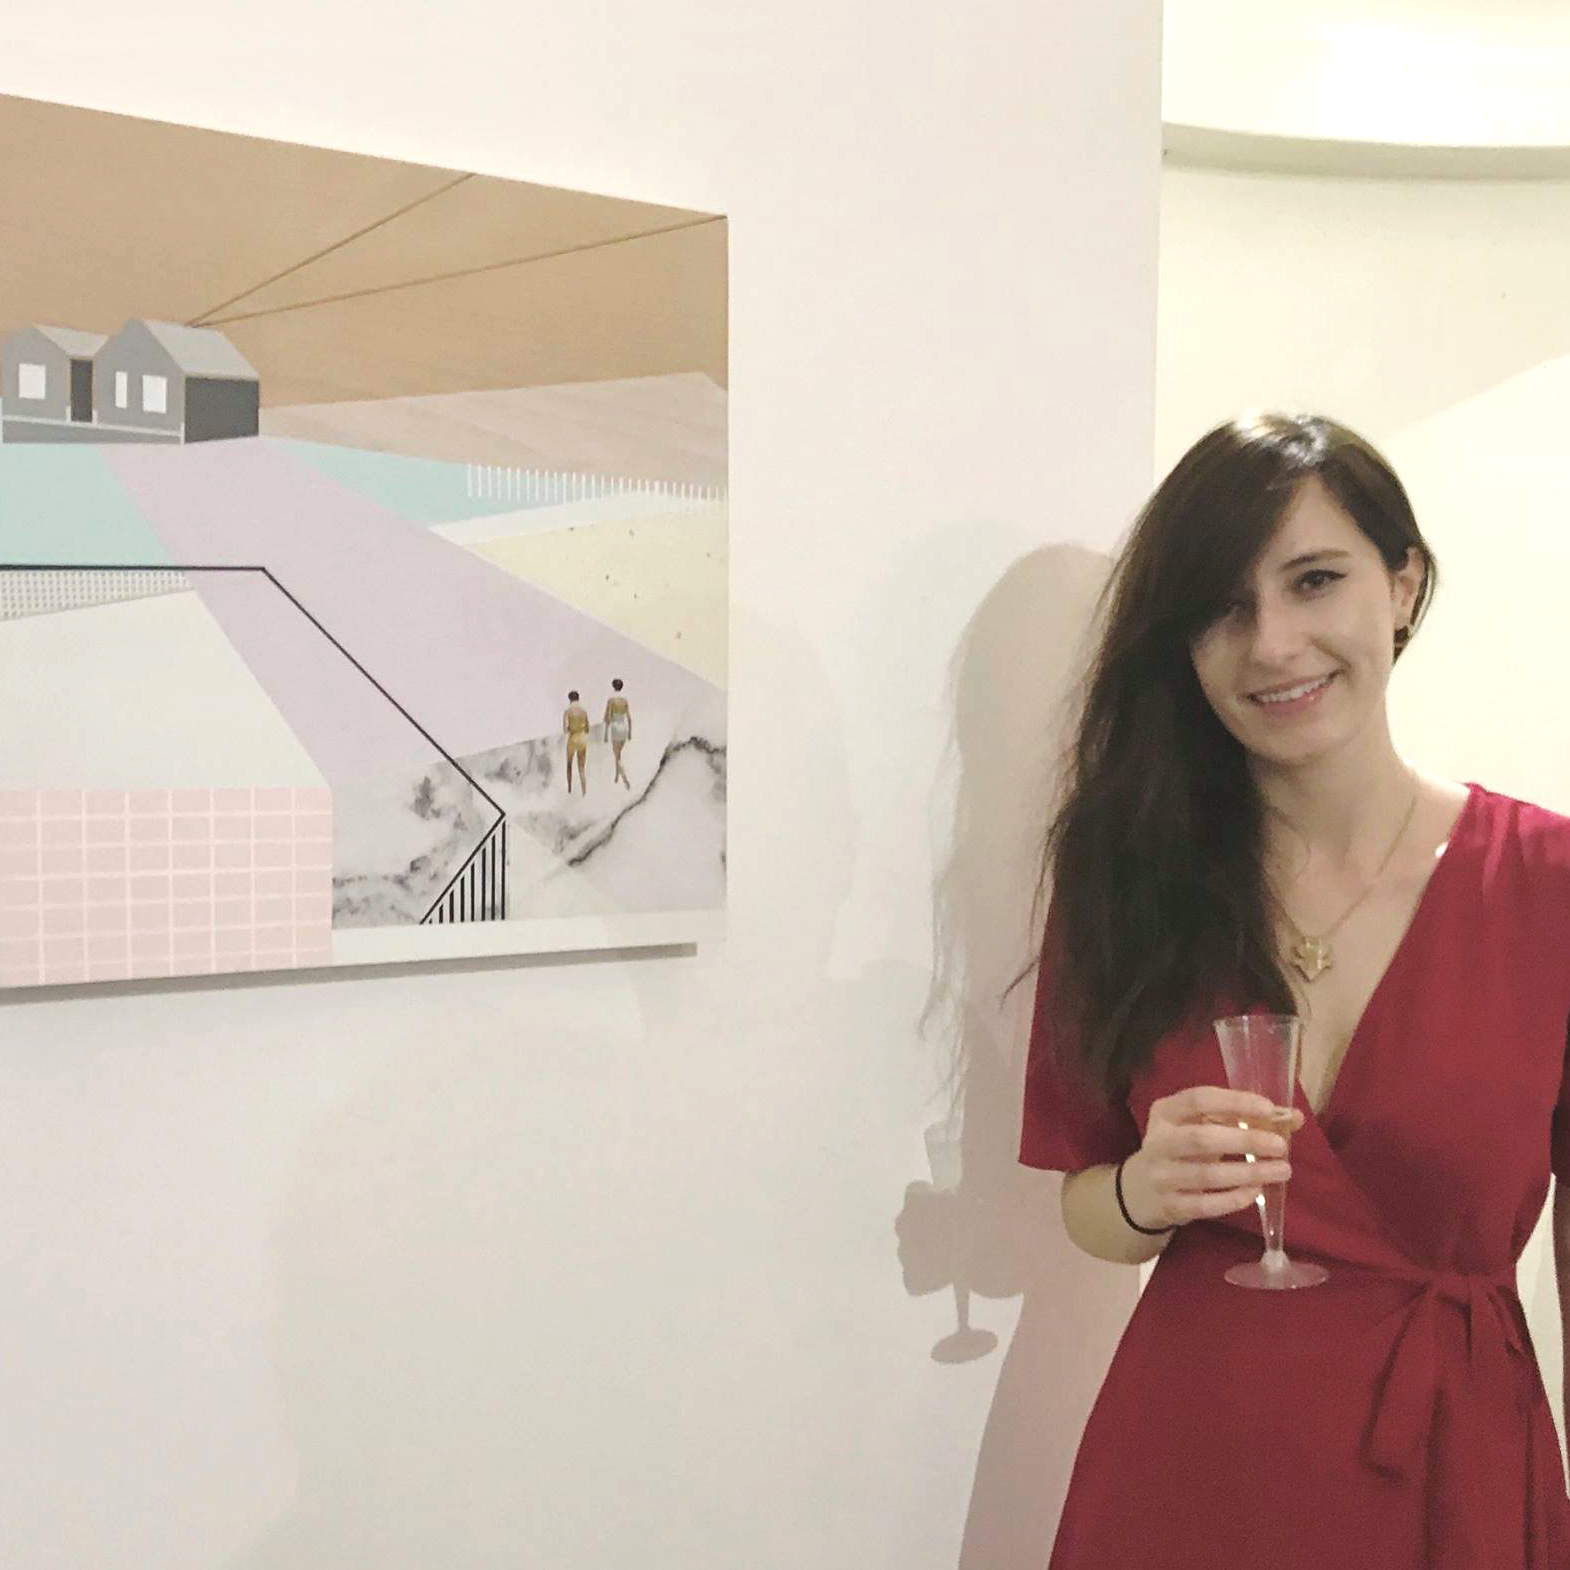 Our warm congratulations to Mairi Timoney, who was awarded the Silvana Editoriale Prize at The Art Prize CBM in Turin.